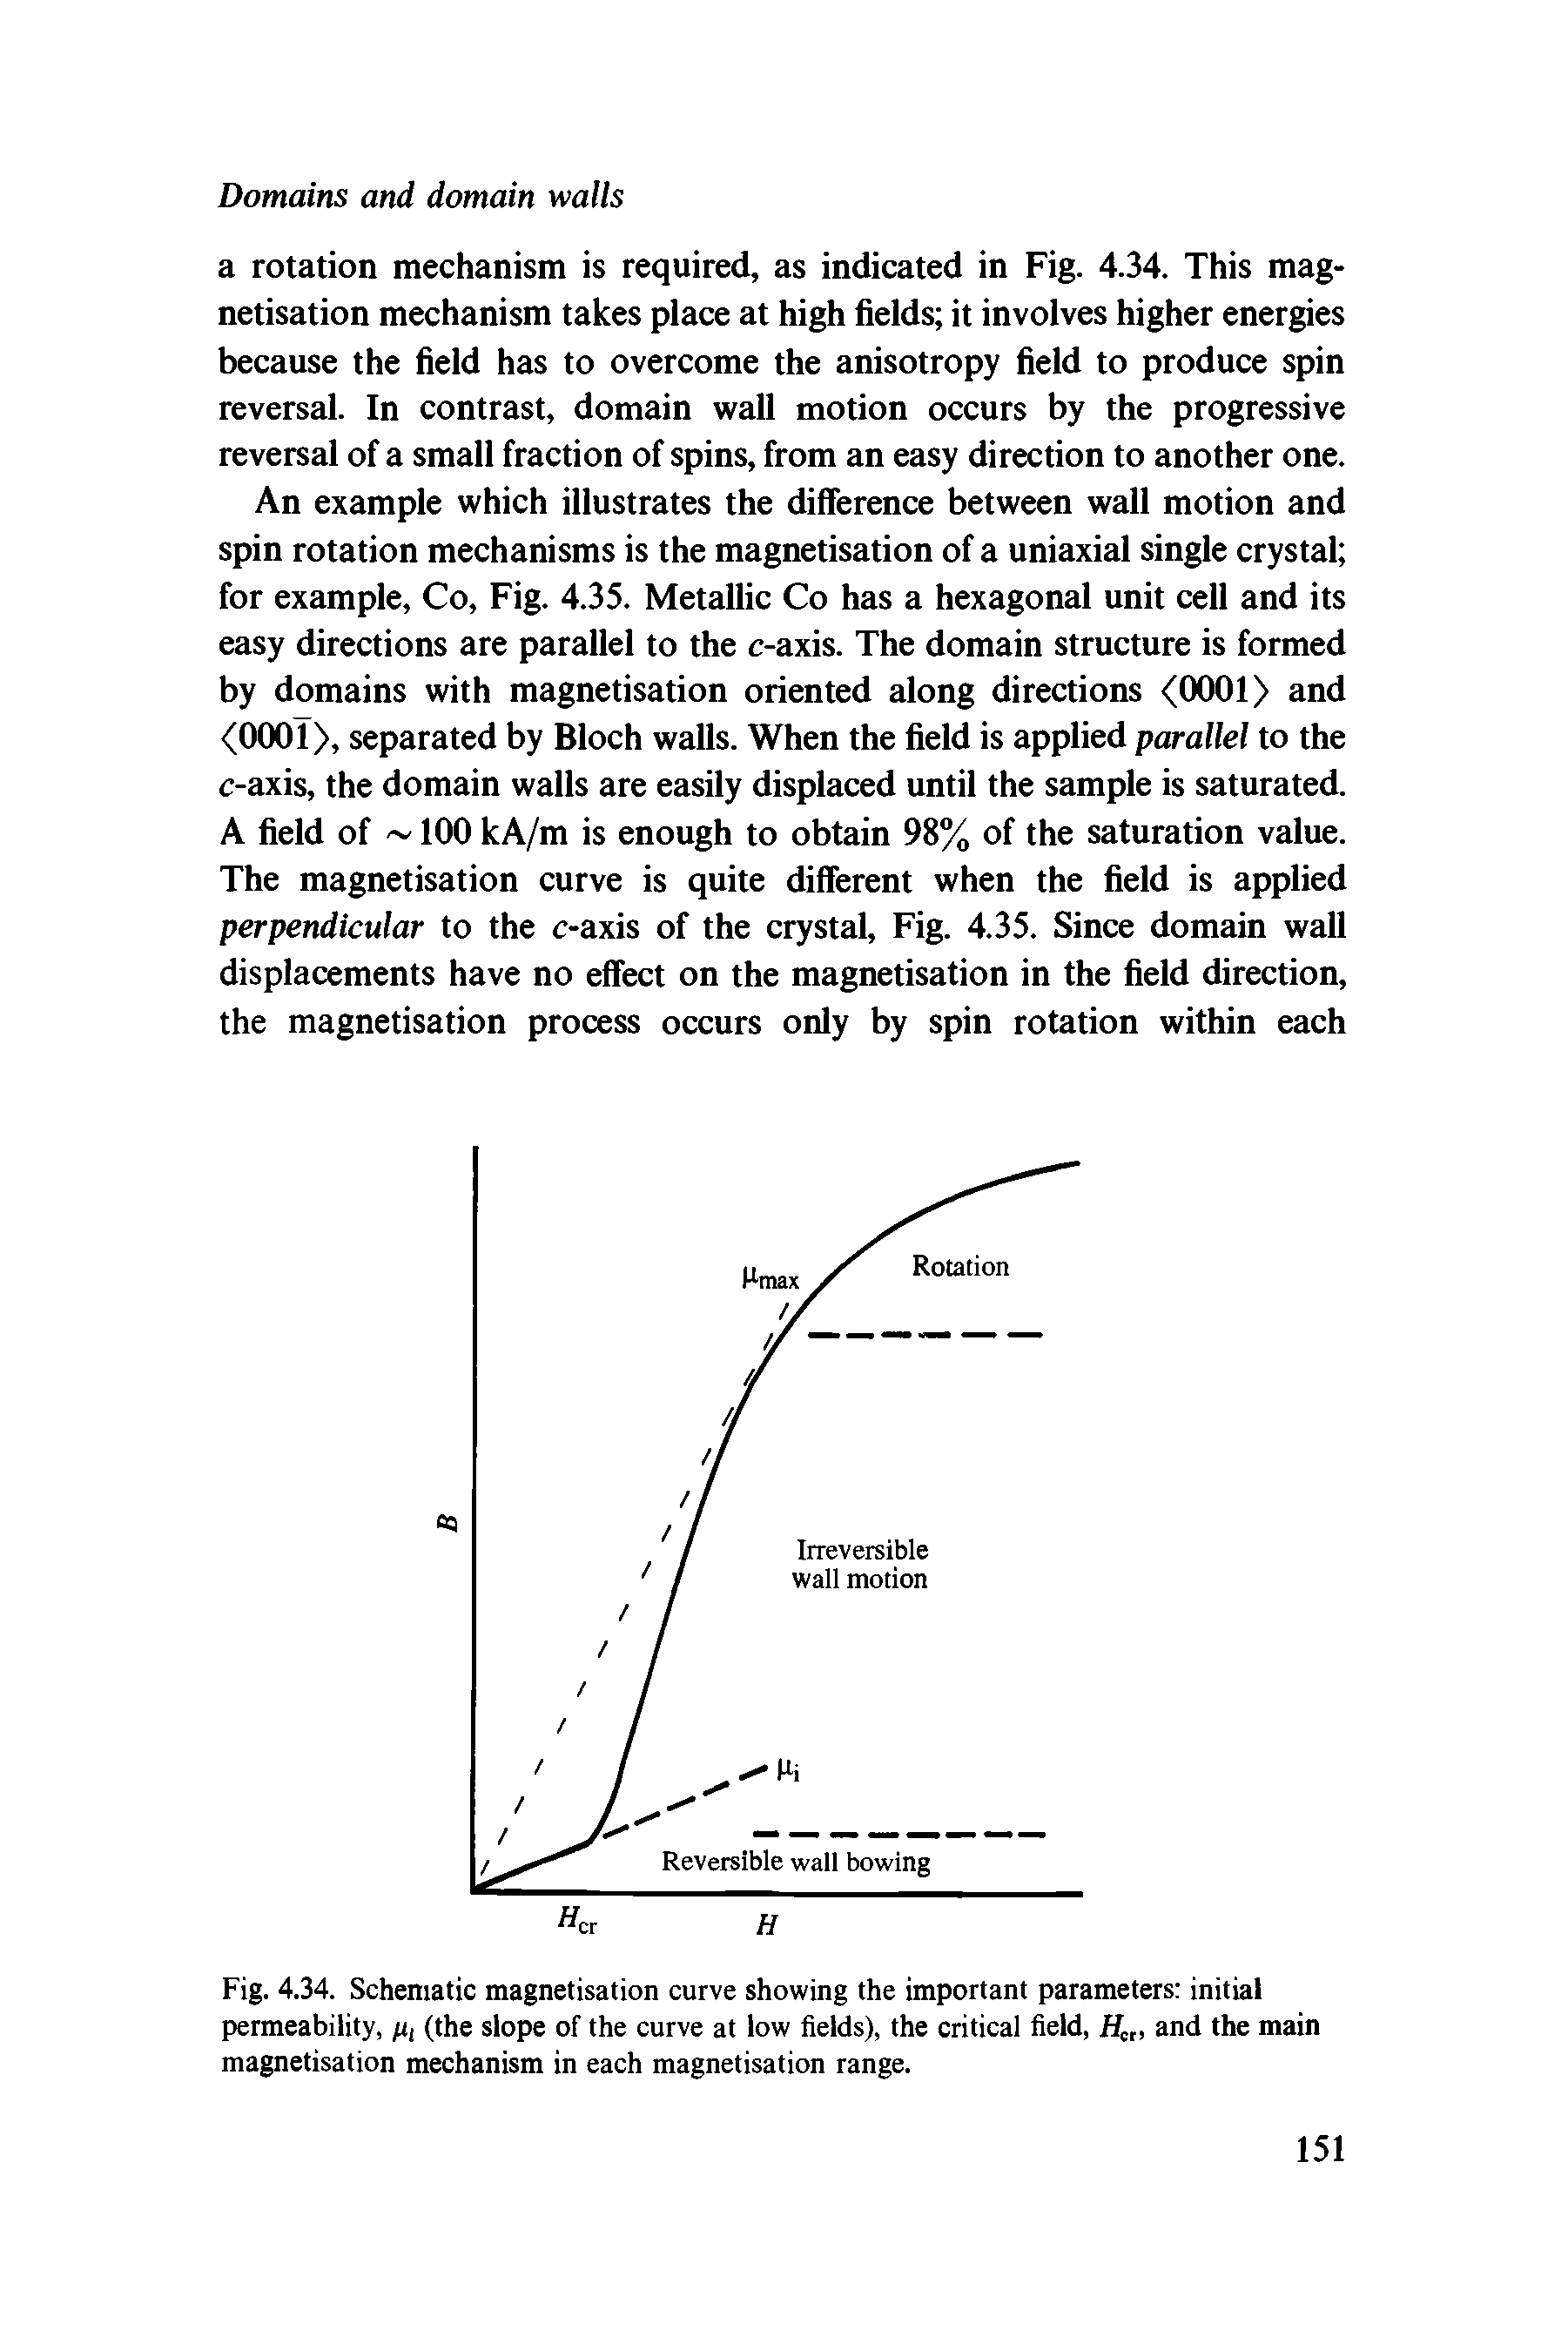 Fig. 4.34. Schematic magnetisation curve showing the important parameters initial permeability, Hi (the slope of the curve at low fields), the critical field. He and the main magnetisation mechanism in each magnetisation range.